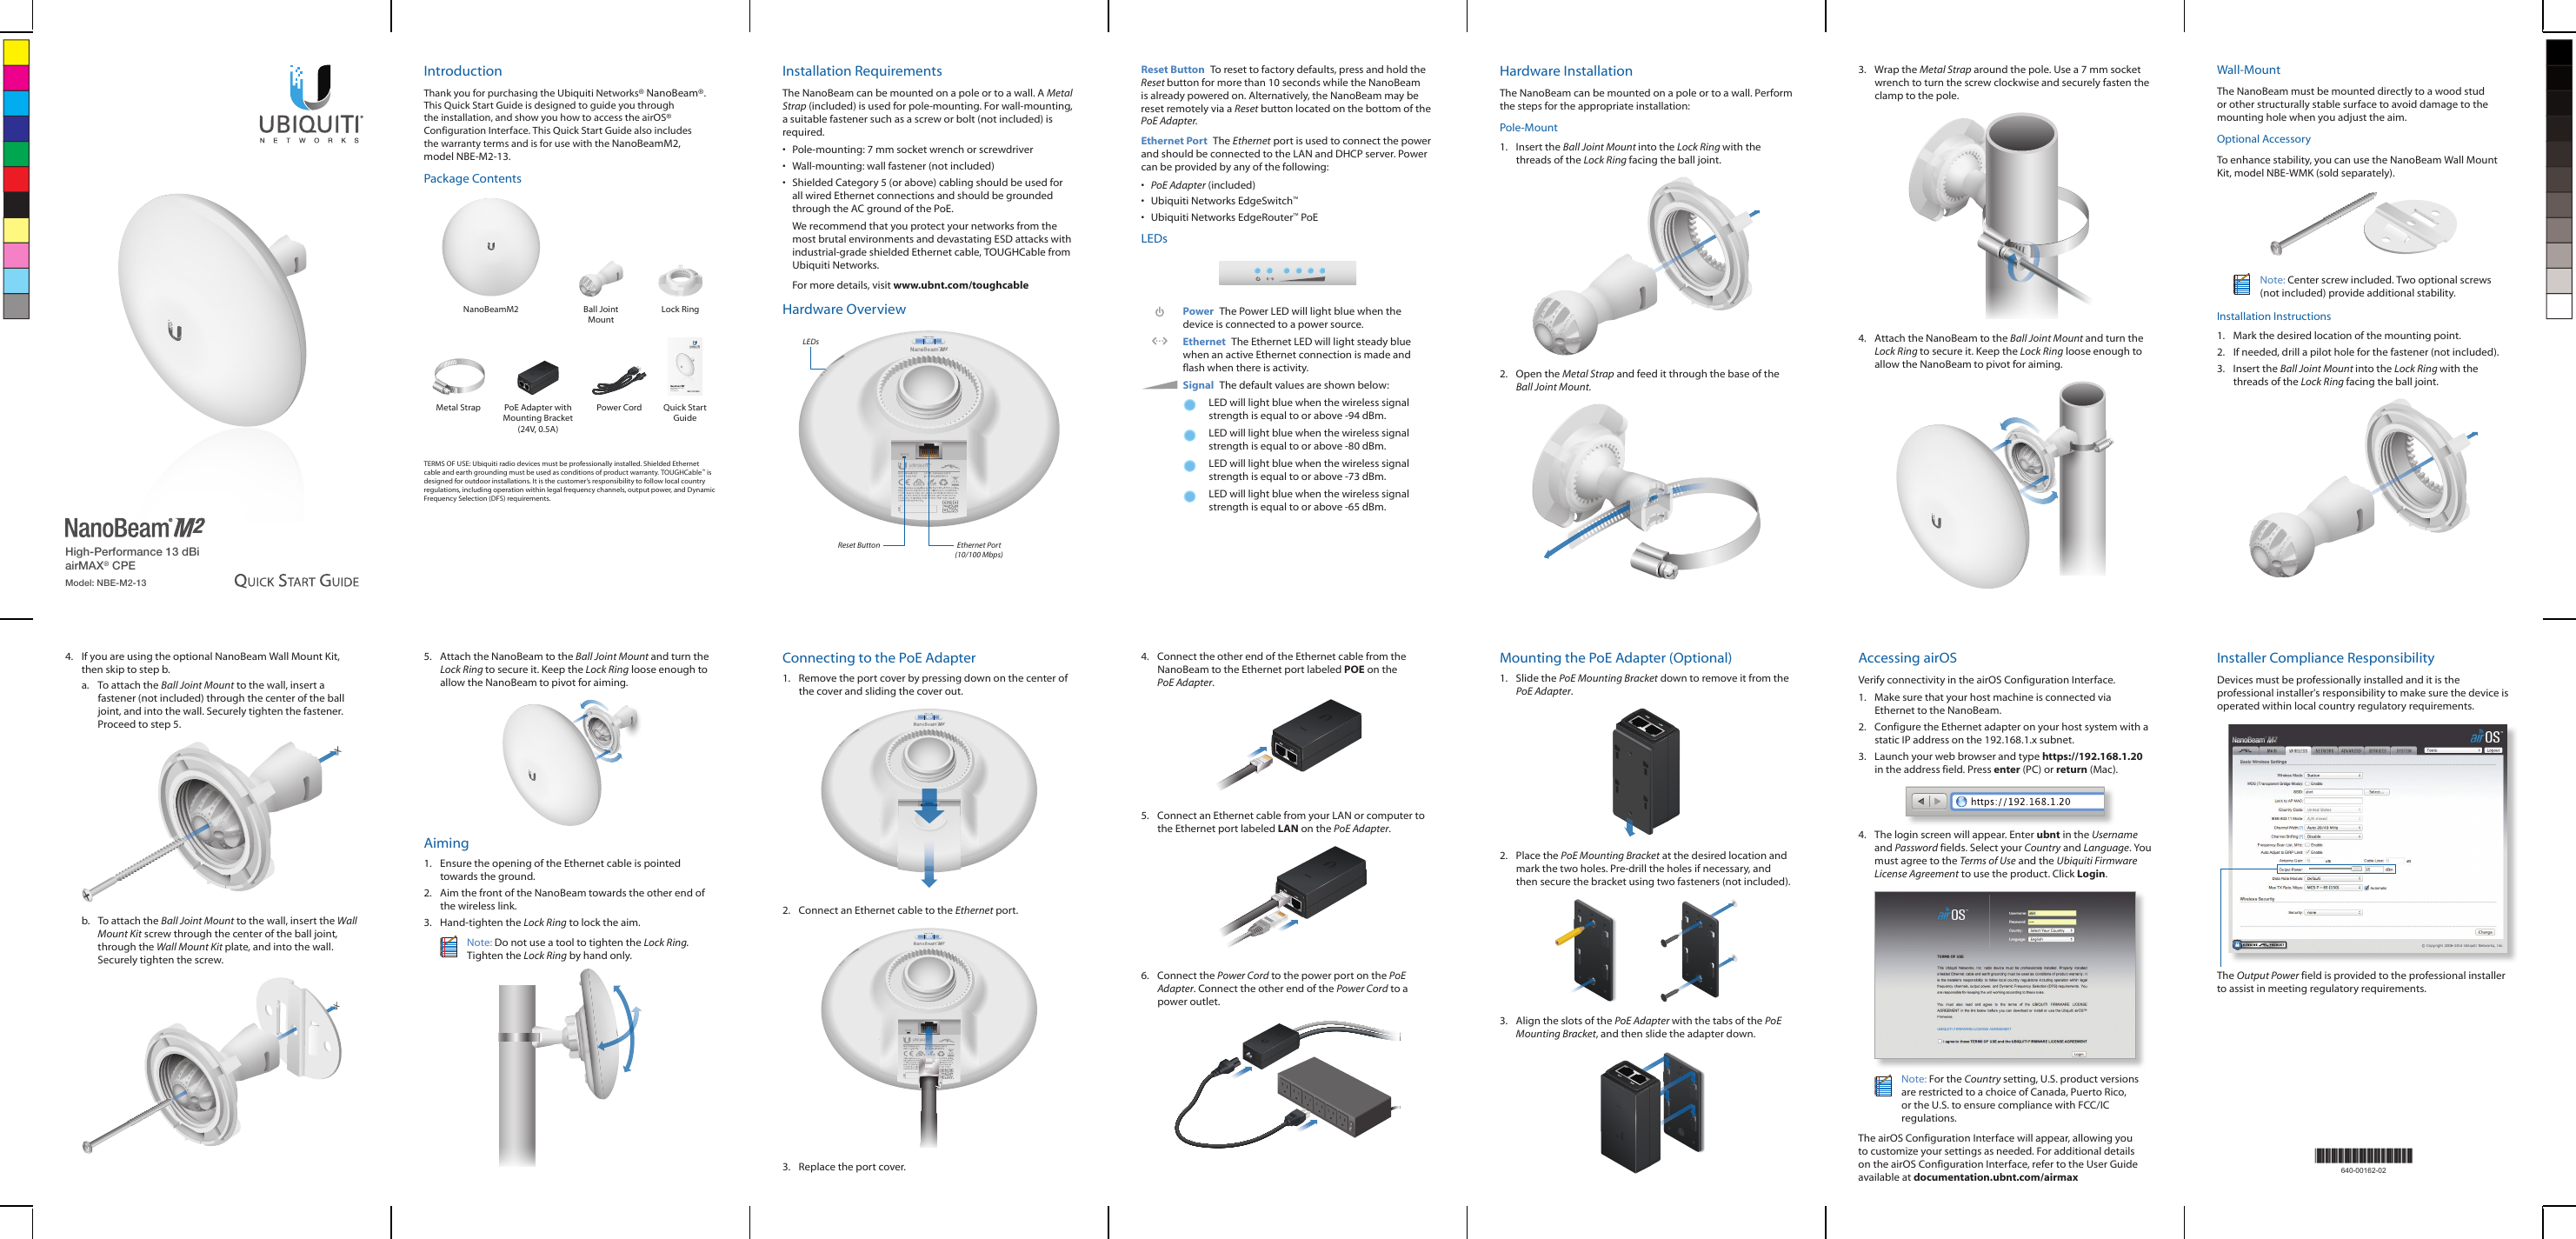 High-Performance 13 dBi airMAX® CPEModel: NBE-M2-13IntroductionThank you for purchasing the Ubiquiti Networks® NanoBeam®. This Quick Start Guide is designed to guide you through the installation, and show you how to access the airOS® Configuration Interface. This Quick Start Guide also includes the warranty terms and is for use with the NanoBeamM2, modelNBE-M2-13.Package ContentsNanoBeamM2 Ball Joint MountLock RingHigh-Performance 13 dBi airMAX® CPEModel: NBE-M2-13Metal Strap PoE Adapter with Mounting Bracket (24V, 0.5A)Power Cord  Quick Start GuideTERMS OF USE: Ubiquiti radio devices must be professionally installed. Shielded Ethernet cable and earth grounding must be used as conditions of product warranty. TOUGHCable™ is designed for outdoor installations. It is the customer’s responsibility to follow local country regulations, including operation within legal frequency channels, output power, and Dynamic Frequency Selection (DFS) requirements.Installation RequirementsThe NanoBeam can be mounted on a pole or to a wall. A Metal Strap (included) is used for pole-mounting. For wall-mounting, a suitable fastener such as a screw or bolt (not included) is required.•  Pole-mounting: 7 mm socket wrench or screwdriver•  Wall-mounting: wall fastener (not included)•  Shielded Category 5 (or above) cabling should be used for all wired Ethernet connections and should be grounded through the AC ground of the PoE.We recommend that you protect your networks from the most brutal environments and devastating ESD attacks with industrial-grade shielded Ethernet cable, TOUGHCable from Ubiquiti Networks.For more details, visit www.ubnt.com/toughcableHardware OverviewLEDsReset Button Ethernet Port (10/100 Mbps)Reset Button  To reset to factory defaults, press and hold the Reset button for more than 10 seconds while the NanoBeam is already poweredon. Alternatively, the NanoBeam may be reset remotely via a Reset button located on the bottom of the PoE Adapter.Ethernet Port  The Ethernet port is used to connect the power and should be connected to the LAN and DHCP server. Power can be provided by any of the following:•  PoE Adapter (included)•  Ubiquiti Networks EdgeSwitch™•  Ubiquiti Networks EdgeRouter™ PoELEDsPower The Power LED will light blue when the device is connected to a power source.Ethernet  The Ethernet LED will light steady blue when an active Ethernet connection is made and flash when there is activity.Signal  The default values are shown below:LED will light blue when the wireless signal strength is equal to or above -94 dBm.LED will light blue when the wireless signal strength is equal to or above -80 dBm.LED will light blue when the wireless signal strength is equal to or above -73 dBm.LED will light blue when the wireless signal strength is equal to or above -65 dBm.Hardware InstallationThe NanoBeam can be mounted on a pole or to a wall. Perform the steps for the appropriate installation:Pole-Mount1.  Insert the Ball Joint Mount into the Lock Ring with the threads of the Lock Ring facing the ball joint.2.  Open the Metal Strap and feed it through the base of the Ball Joint Mount.3.  Wrap the Metal Strap around the pole. Use a 7 mm socket wrench to turn the screw clockwise and securely fasten the clamp to the pole.4.  Attach the NanoBeam to the Ball Joint Mount and turn the Lock Ring to secure it. Keep the Lock Ring loose enough to allow the NanoBeam to pivot for aiming.Wall-MountThe NanoBeam must be mounted directly to a wood stud or other structurally stable surface to avoid damage to the mounting hole when you adjust the aim.Optional AccessoryTo enhance stability, you can use the NanoBeam Wall Mount Kit, model NBE-WMK (soldseparately).Note: Center screw included. Two optional screws (not included) provide additional stability. Installation Instructions1.  Mark the desired location of the mounting point.2.  If needed, drill a pilot hole for the fastener (not included).3.  Insert the Ball Joint Mount into the Lock Ring with the threads of the Lock Ring facing the ball joint.4.  If you are using the optional NanoBeam Wall Mount Kit, then skip to step b.a.  To attach the Ball Joint Mount to the wall, insert a fastener (not included) through the center of the ball joint, and into the wall. Securely tighten the fastener. Proceed to step 5.b.  To attach the Ball Joint Mount to the wall, insert the Wall Mount Kit screw through the center of the ball joint, through the Wall Mount Kit plate, and into the wall. Securely tighten the screw.5.  Attach the NanoBeam to the Ball Joint Mount and turn the Lock Ring to secure it. Keep the Lock Ring loose enough to allow the NanoBeam to pivot for aiming.Aiming1.  Ensure the opening of the Ethernet cable is pointed towards the ground.2.  Aim the front of the NanoBeam towards the other end of the wireless link.3.  Hand-tighten the Lock Ring to lock the aim.Note: Do not use a tool to tighten the Lock Ring. Tighten the Lock Ring by hand only.Connecting to the PoE Adapter1.  Remove the port cover by pressing down on the center of the cover and sliding the cover out.2.  Connect an Ethernet cable to the Ethernet port.3.  Replace the port cover.4.  Connect the other end of the Ethernet cable from the NanoBeam to the Ethernet port labeled POE on the PoEAdapter.5.  Connect an Ethernet cable from your LAN or computer to the Ethernet port labeled LAN on the PoE Adapter.6.  Connect the Power Cord to the power port on the PoE Adapter. Connect the other end of the Power Cord to a power outlet.Mounting the PoE Adapter (Optional)1.  Slide the PoE Mounting Bracket down to remove it from the PoEAdapter.2.  Place the PoE Mounting Bracket at the desired location and mark the two holes. Pre‑drill the holes if necessary, and then secure the bracket using two fasteners (not included).3.  Align the slots of the PoE Adapter with the tabs of the PoE Mounting Bracket, and then slide the adapter down.Accessing airOSVerify connectivity in the airOS Configuration Interface.1.  Make sure that your host machine is connected via Ethernet to the NanoBeam. 2.  Configure the Ethernet adapter on your host system with a static IP address on the 192.168.1.x subnet.3.  Launch your web browser and type https://192.168.1.20 in the address field. Press enter (PC) or return (Mac). 4.  The login screen will appear. Enter ubnt in the Username and Password fields. Select your Country and Language. You must agree to the Terms of Use and the Ubiquiti Firmware License Agreement to use the product. Click Login.Note: For the Country setting, U.S. product versions are restricted to a choice of Canada, Puerto Rico, or the U.S. to ensure compliance with FCC/IC regulations. The airOS Configuration Interface will appear, allowing you to customize your settings as needed. For additional details on the airOS Configuration Interface, refer to the User Guide available at documentation.ubnt.com/airmax*640-00162-02*640-00162-02Installer Compliance ResponsibilityDevices must be professionally installed and it is the professional installer&apos;s responsibility to make sure the device is operated within local country regulatory requirements.The Output Power field is provided to the professional installer to assist in meeting regulatory requirements.